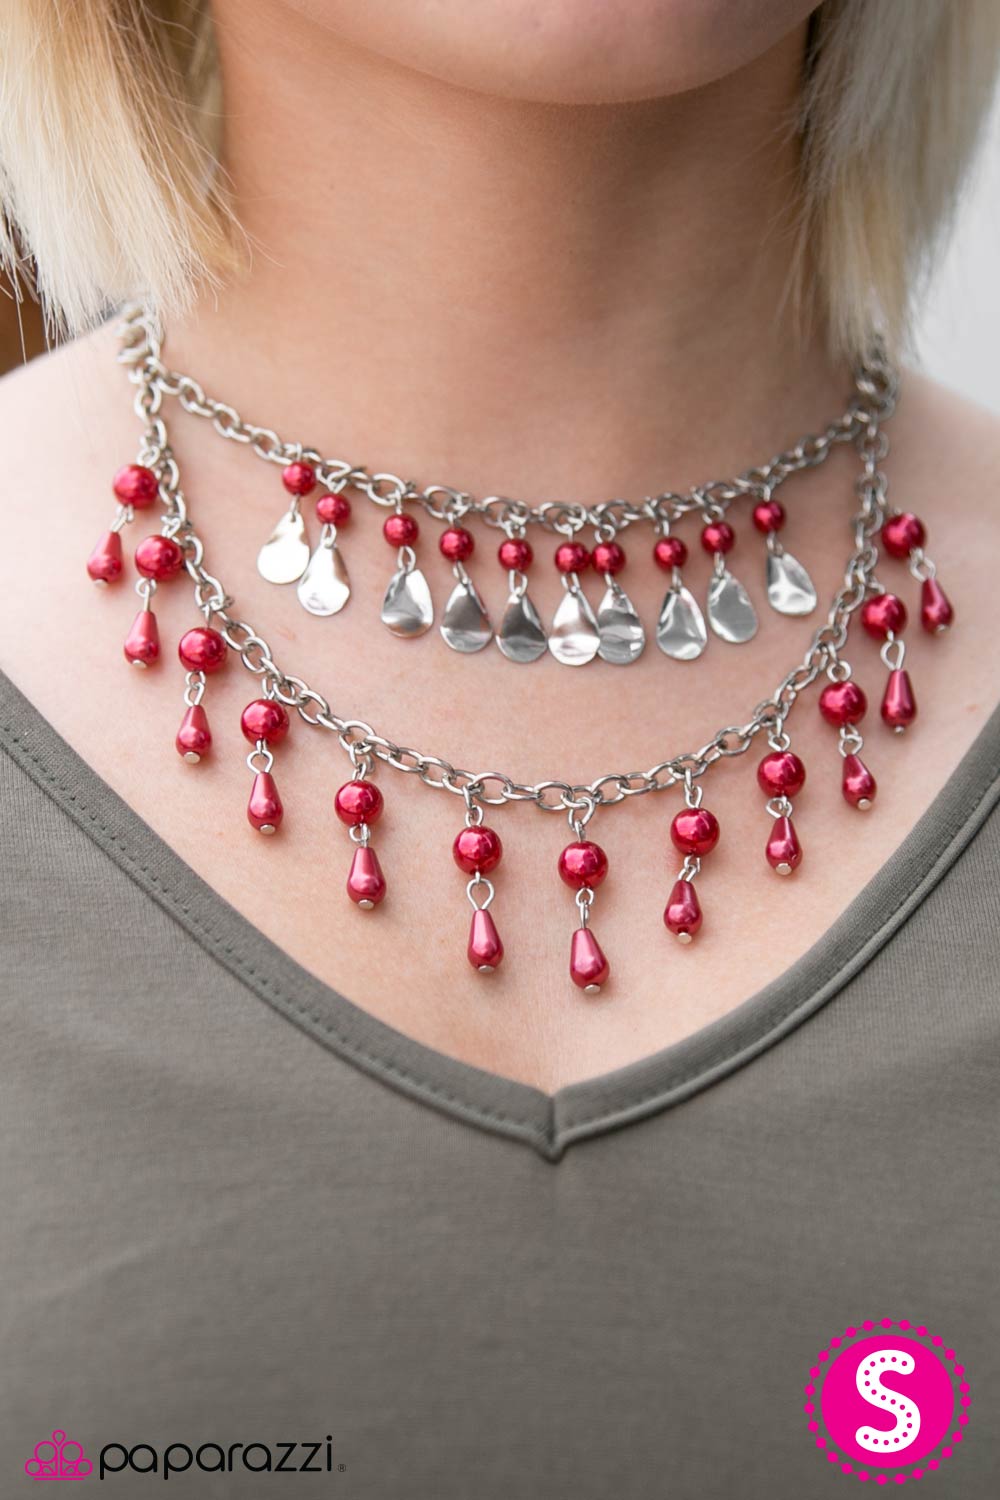 The Drop Top - red - Paparazzi necklace